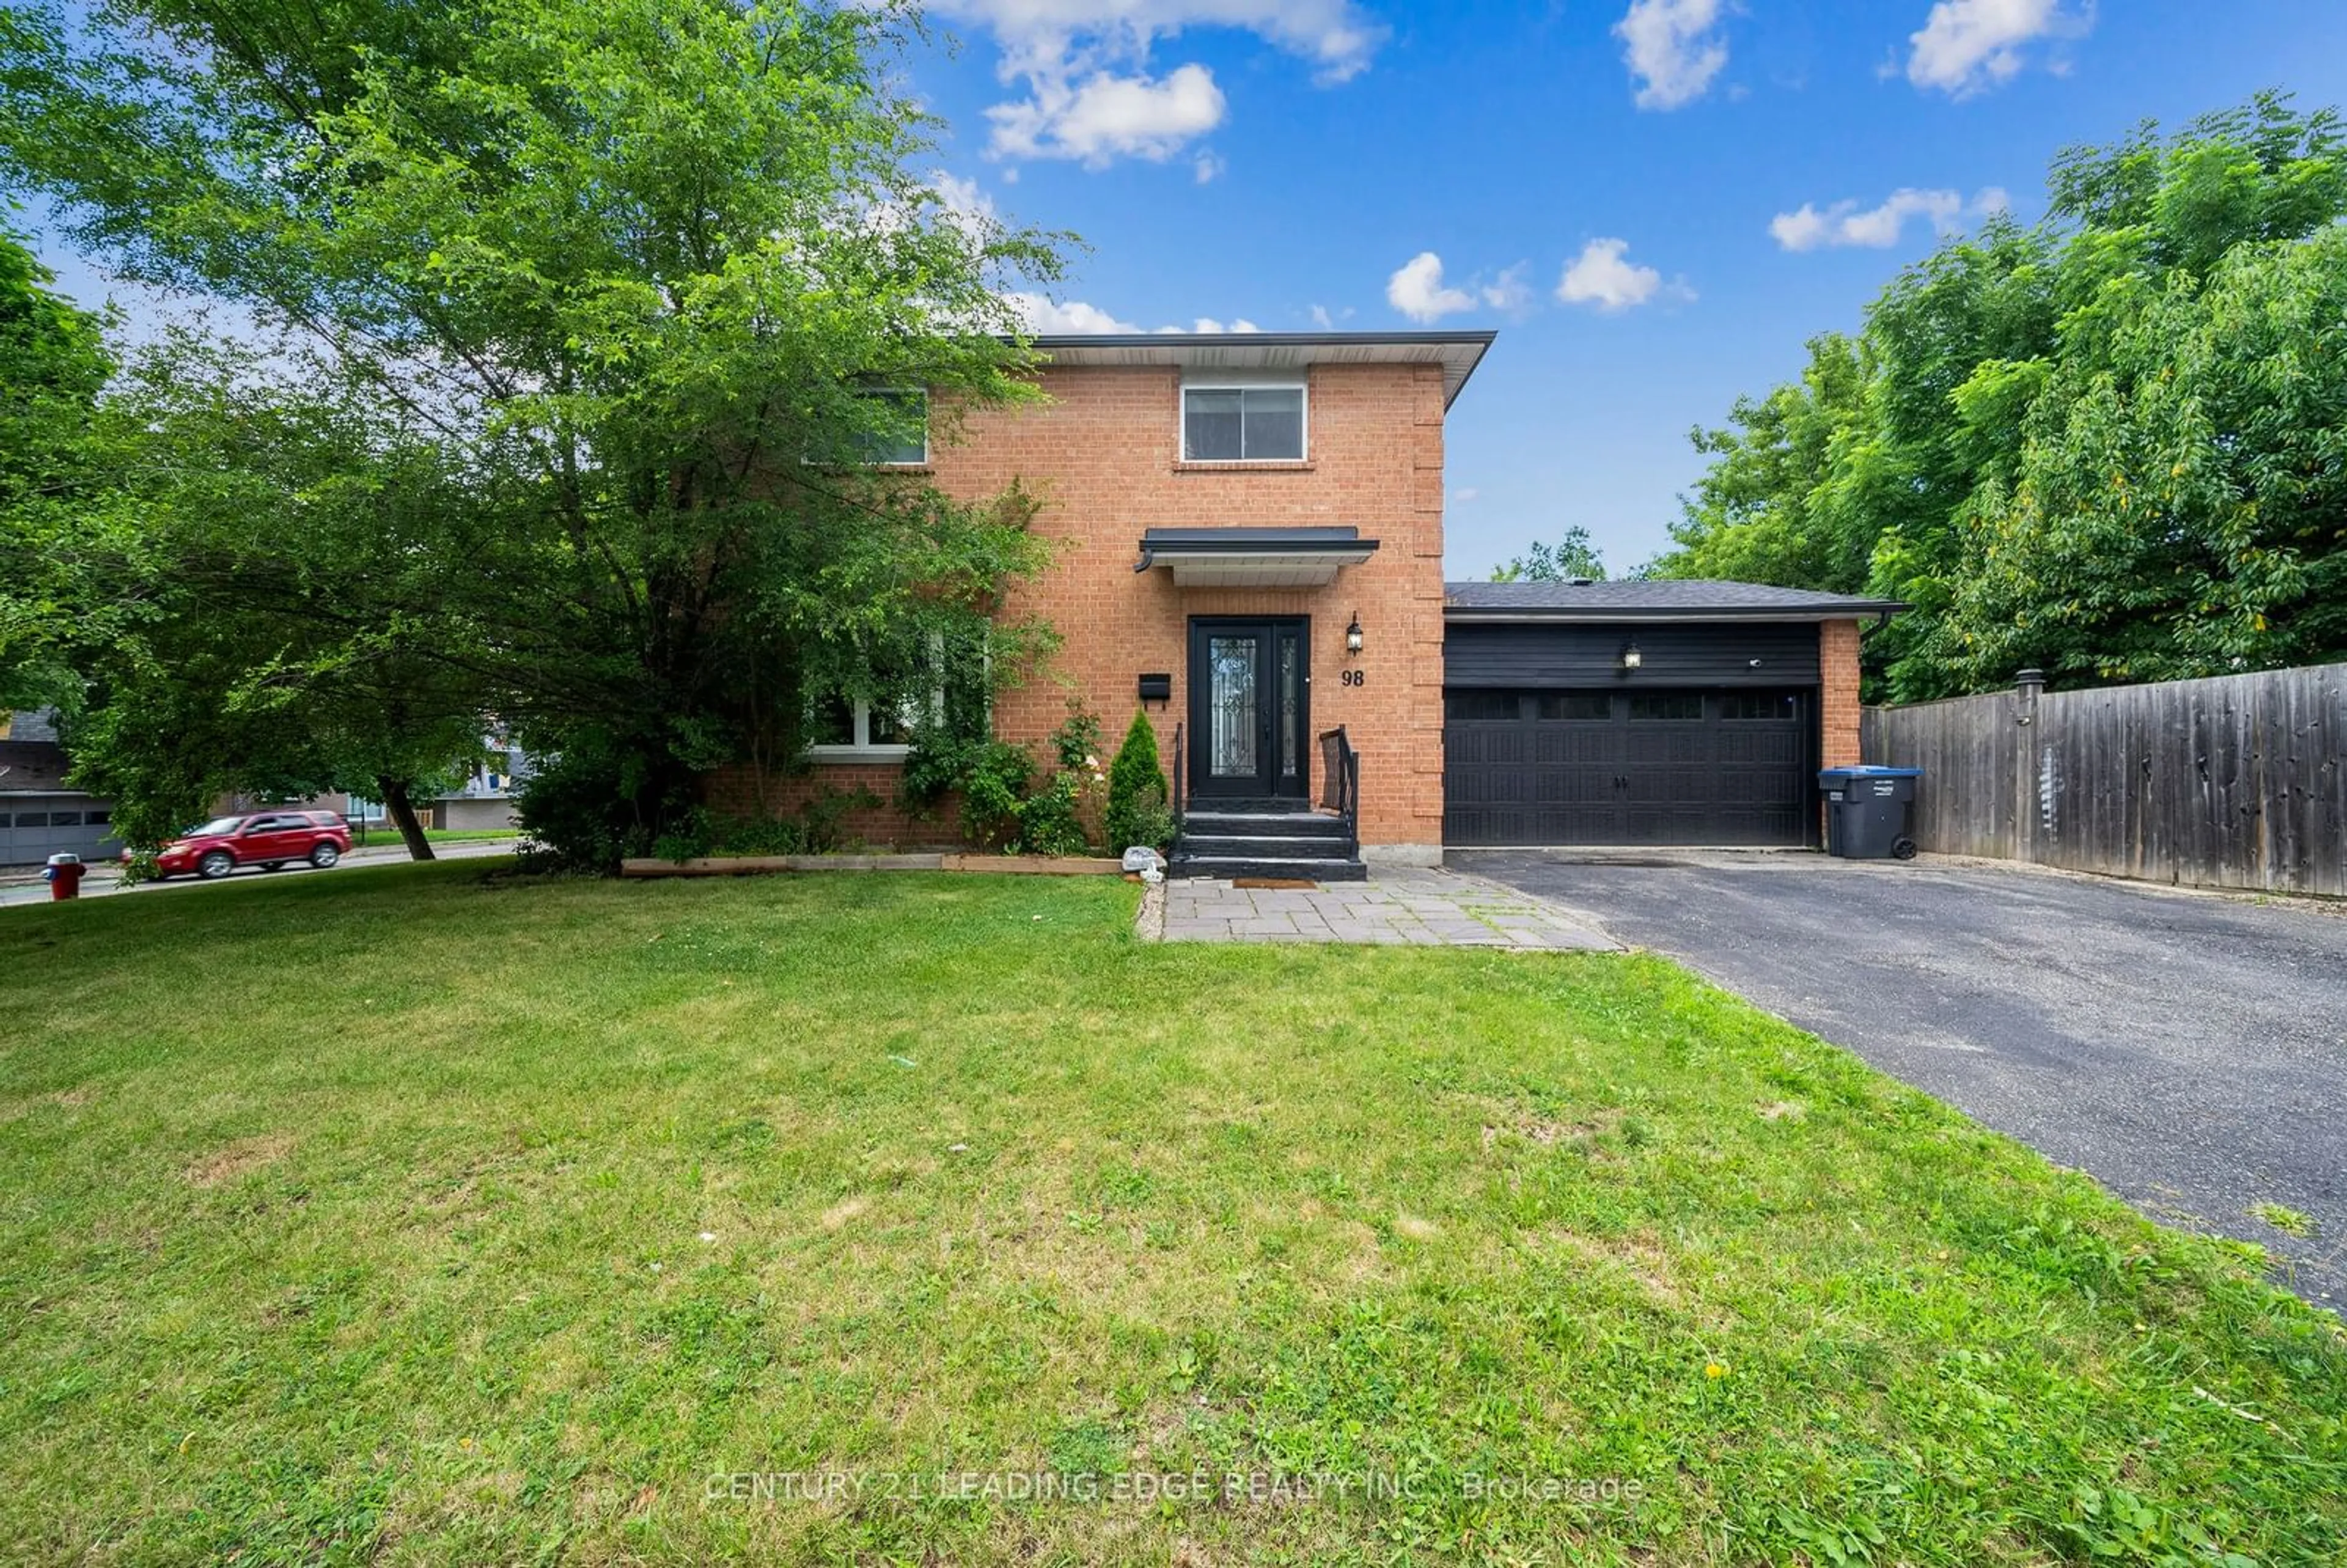 Home with brick exterior material for 98 Church St, Brampton Ontario L6V 3Z2